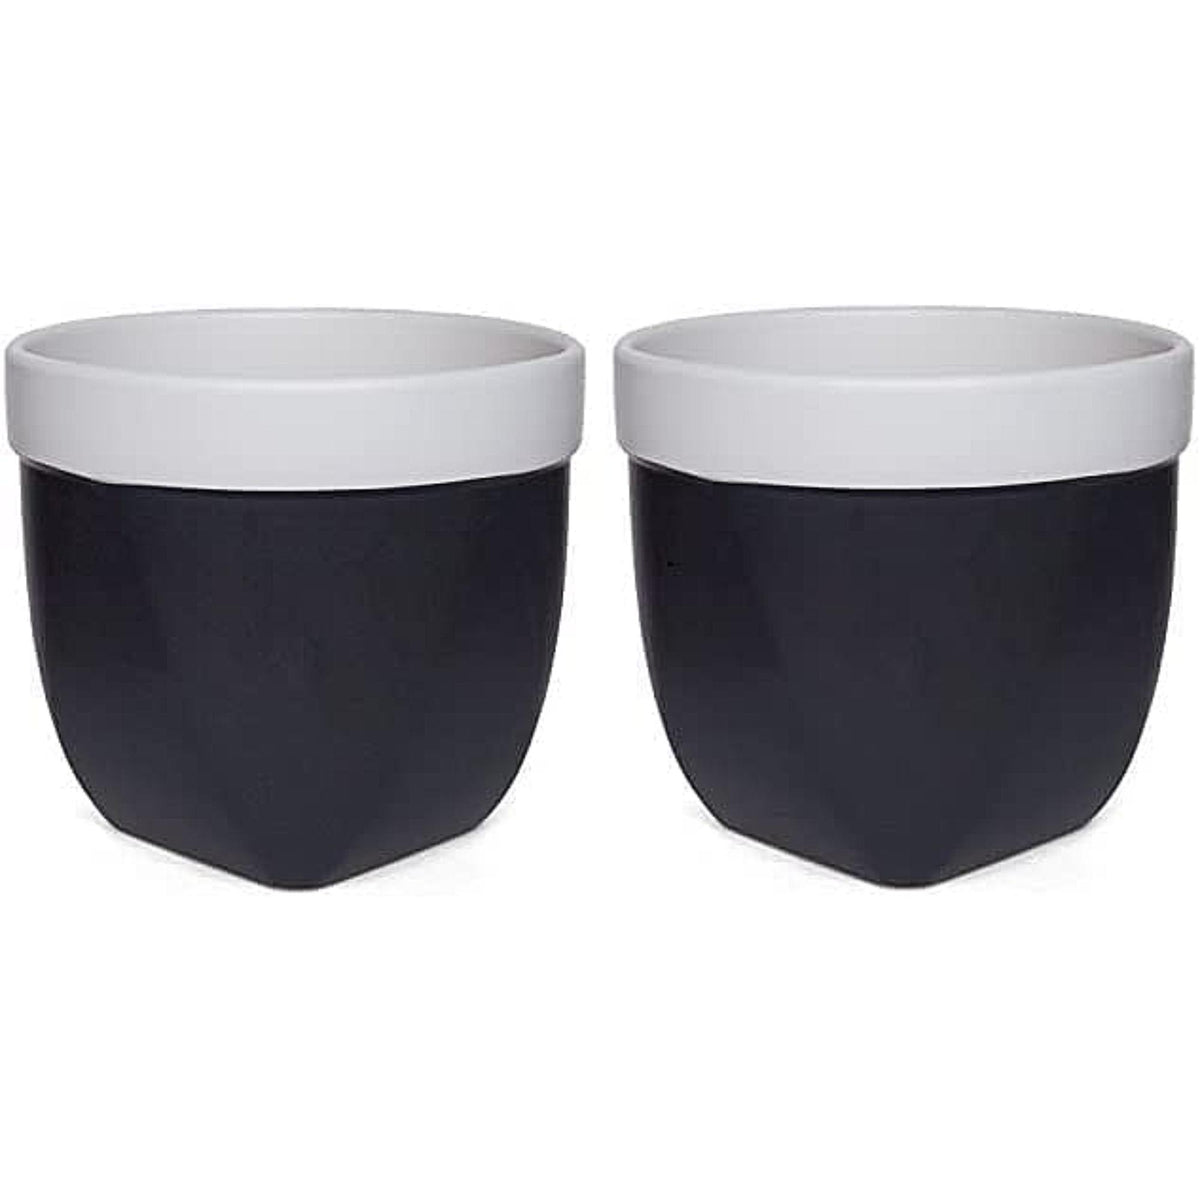 HOSLEY® Clay Grower Versa Pot , Set of 2, 6.77 inches dia. Each.